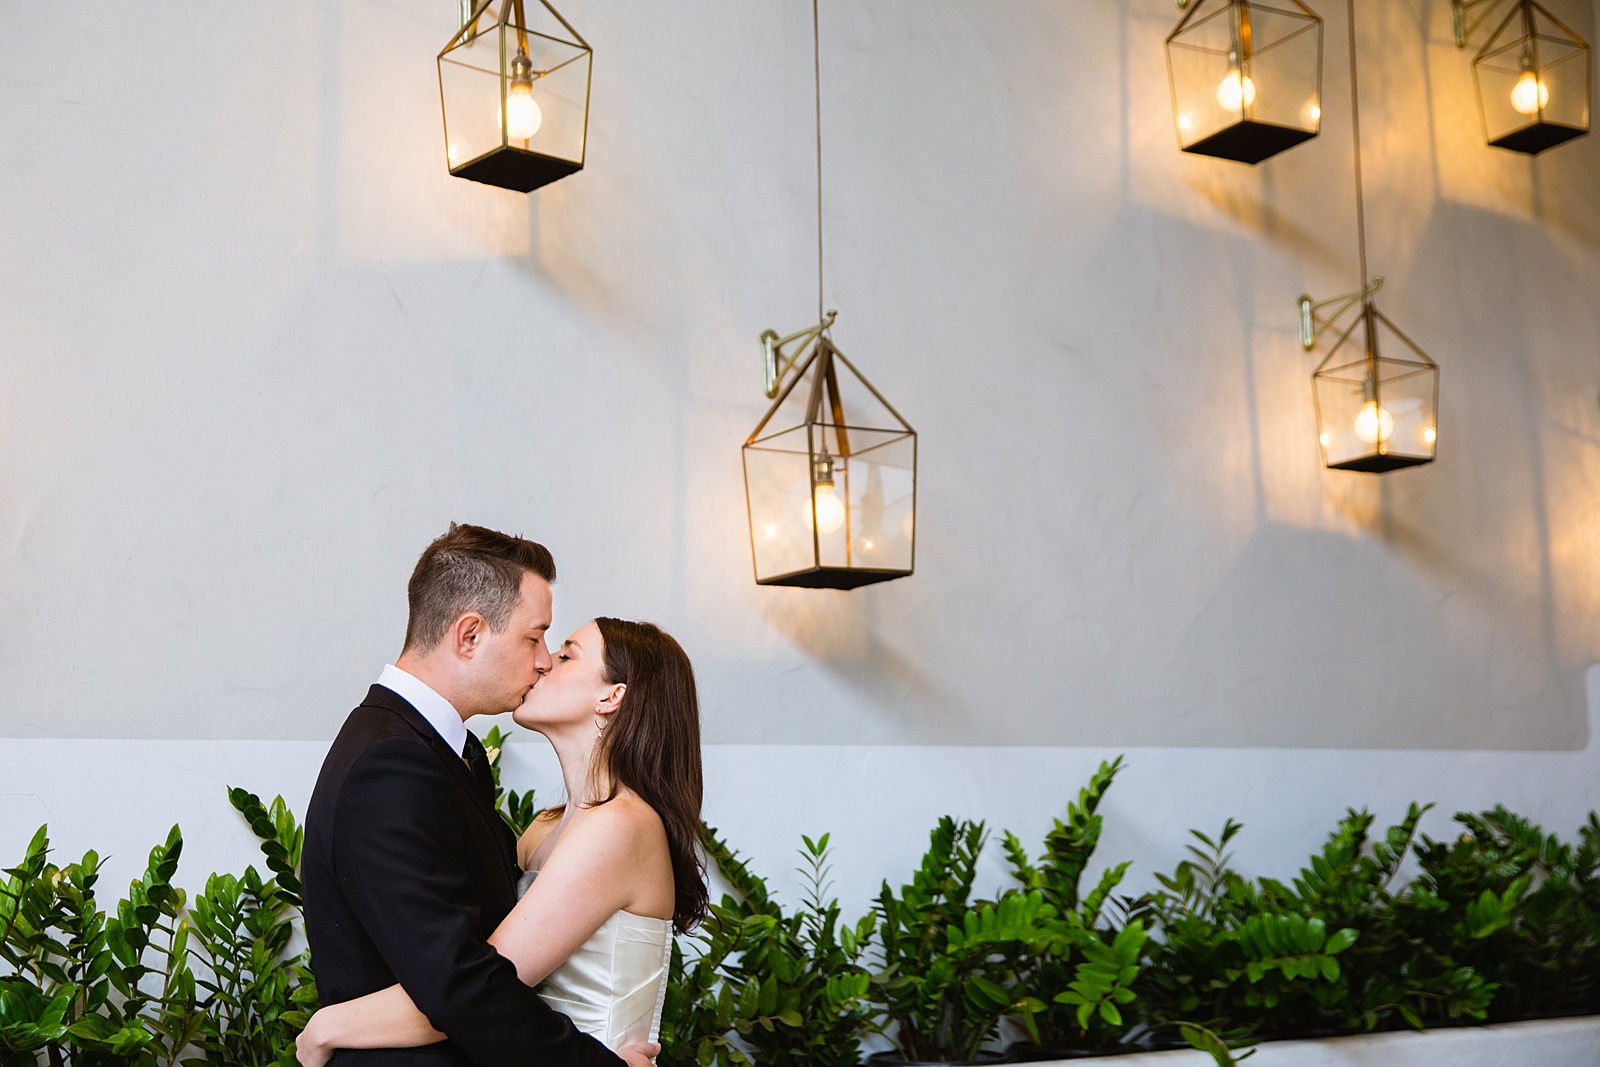 Bride & Groom share a kiss during their The Scott wedding by Scottsdale wedding photographer PMA Photography.